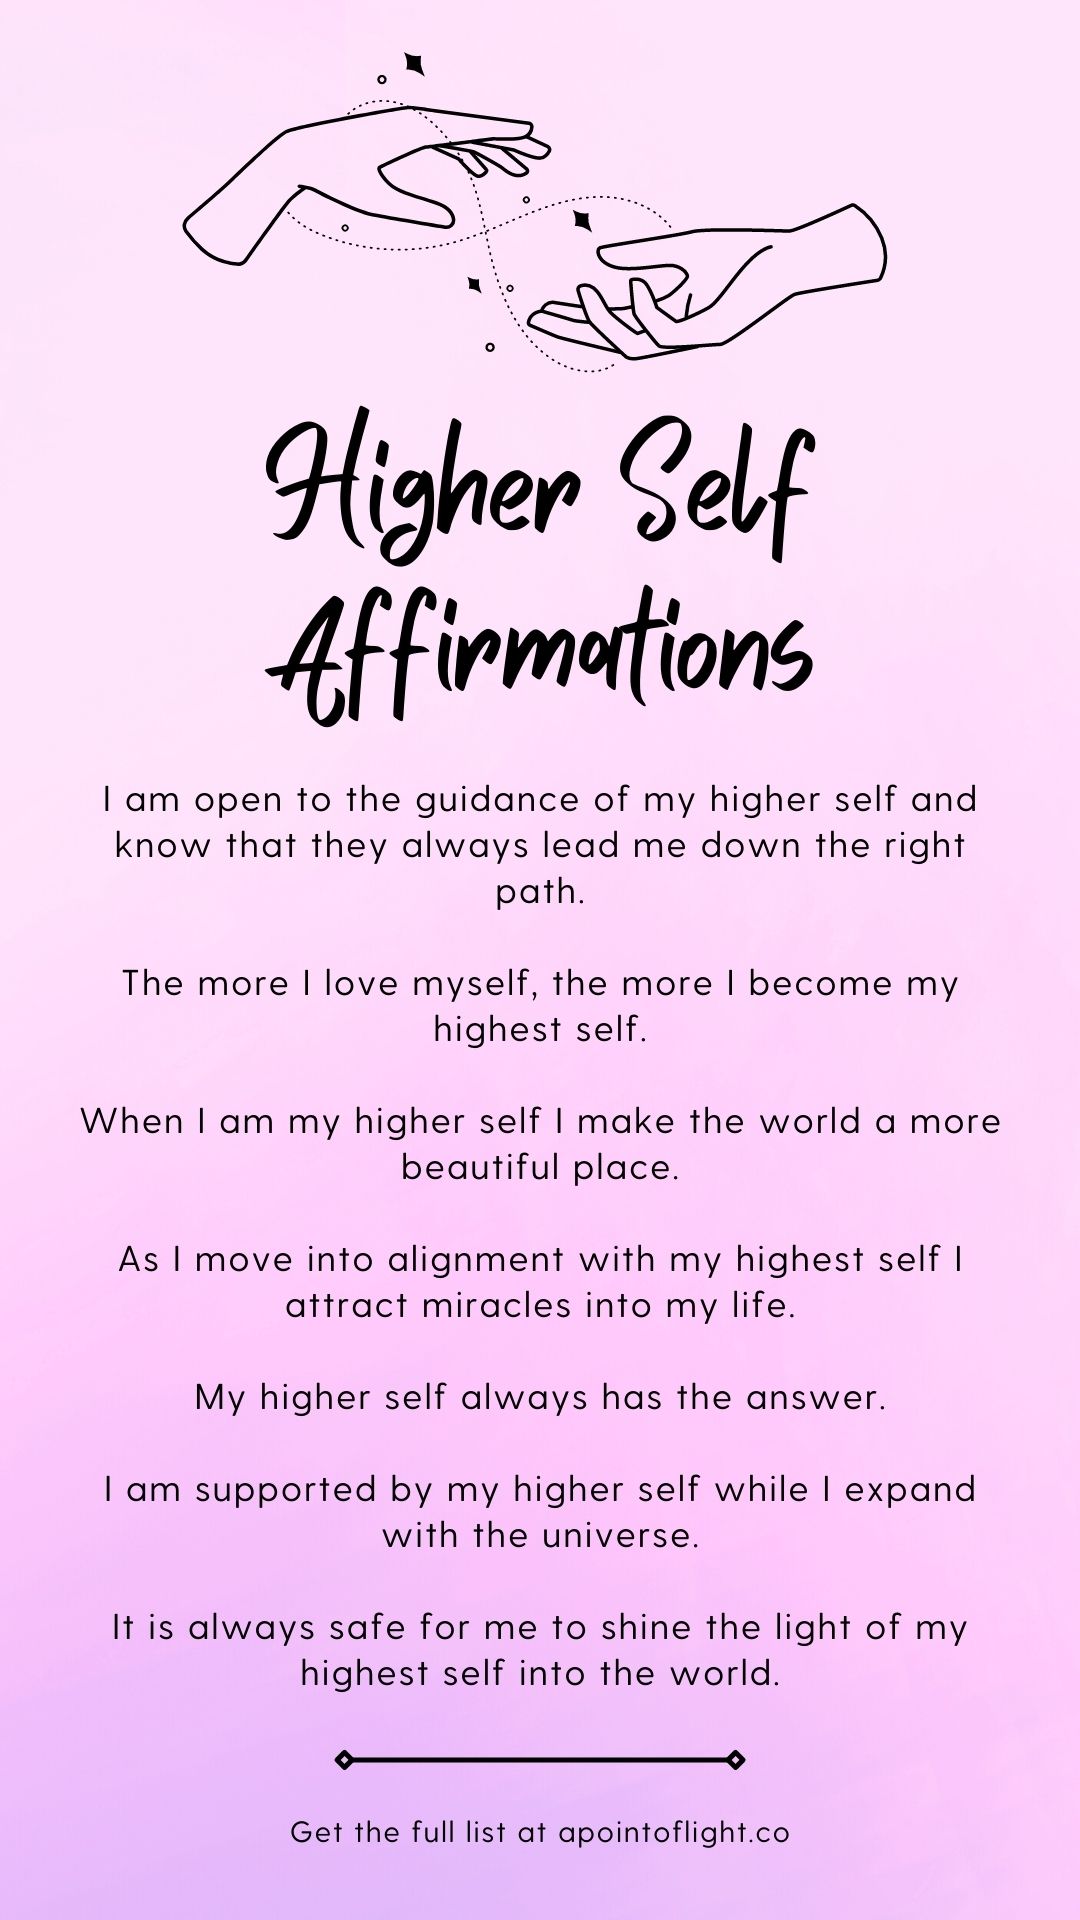 affirmations to connect to your higher self